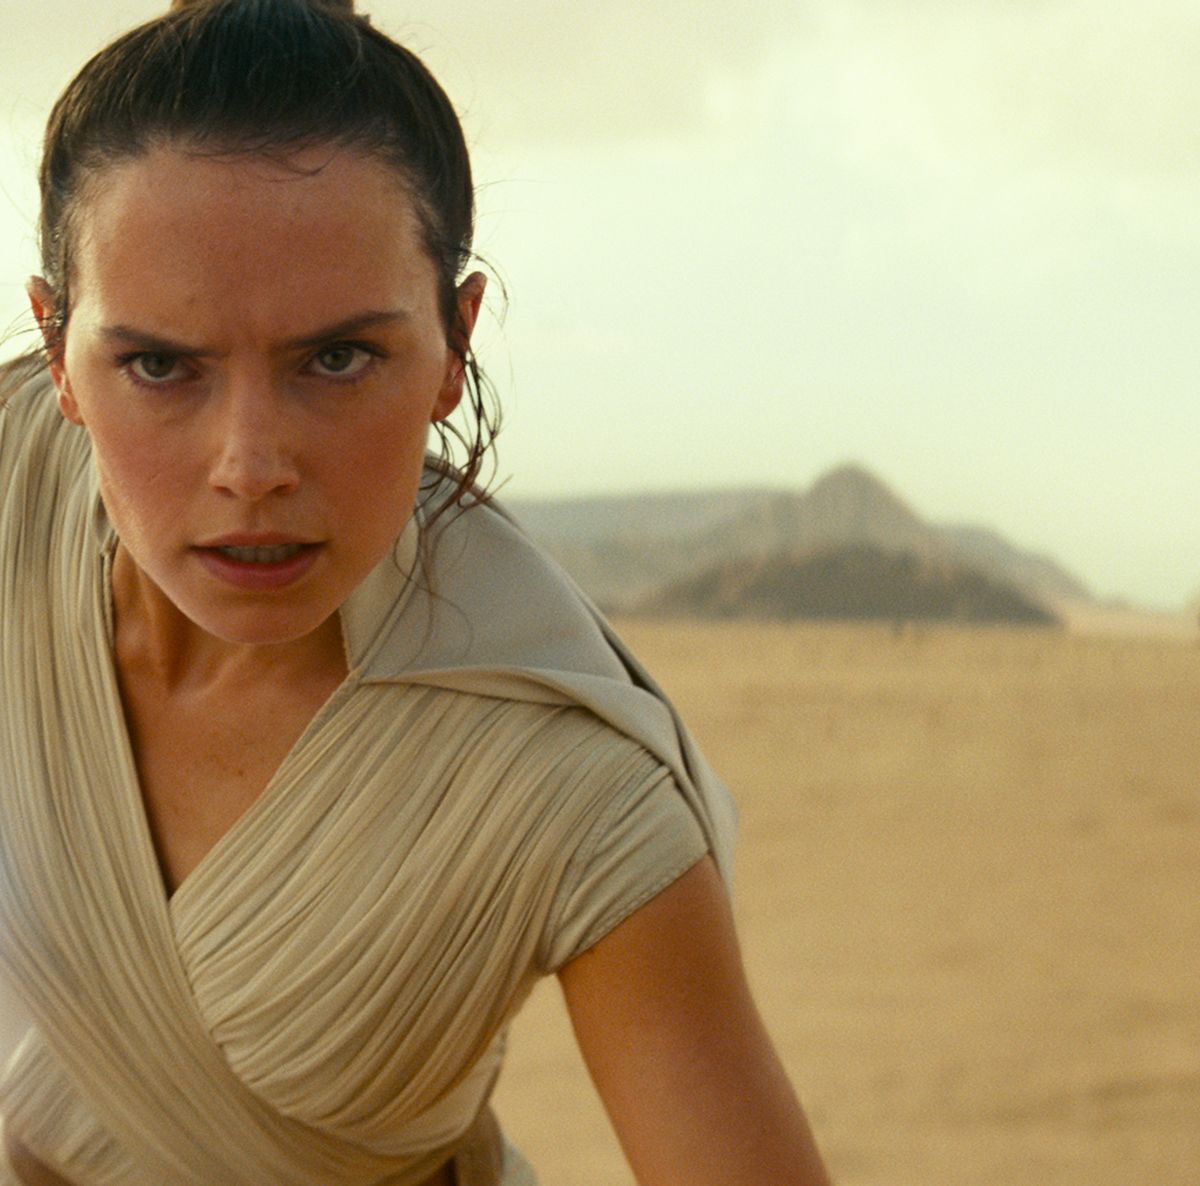 3 New Star Wars Movies Rumored to Get Announced Very Soon